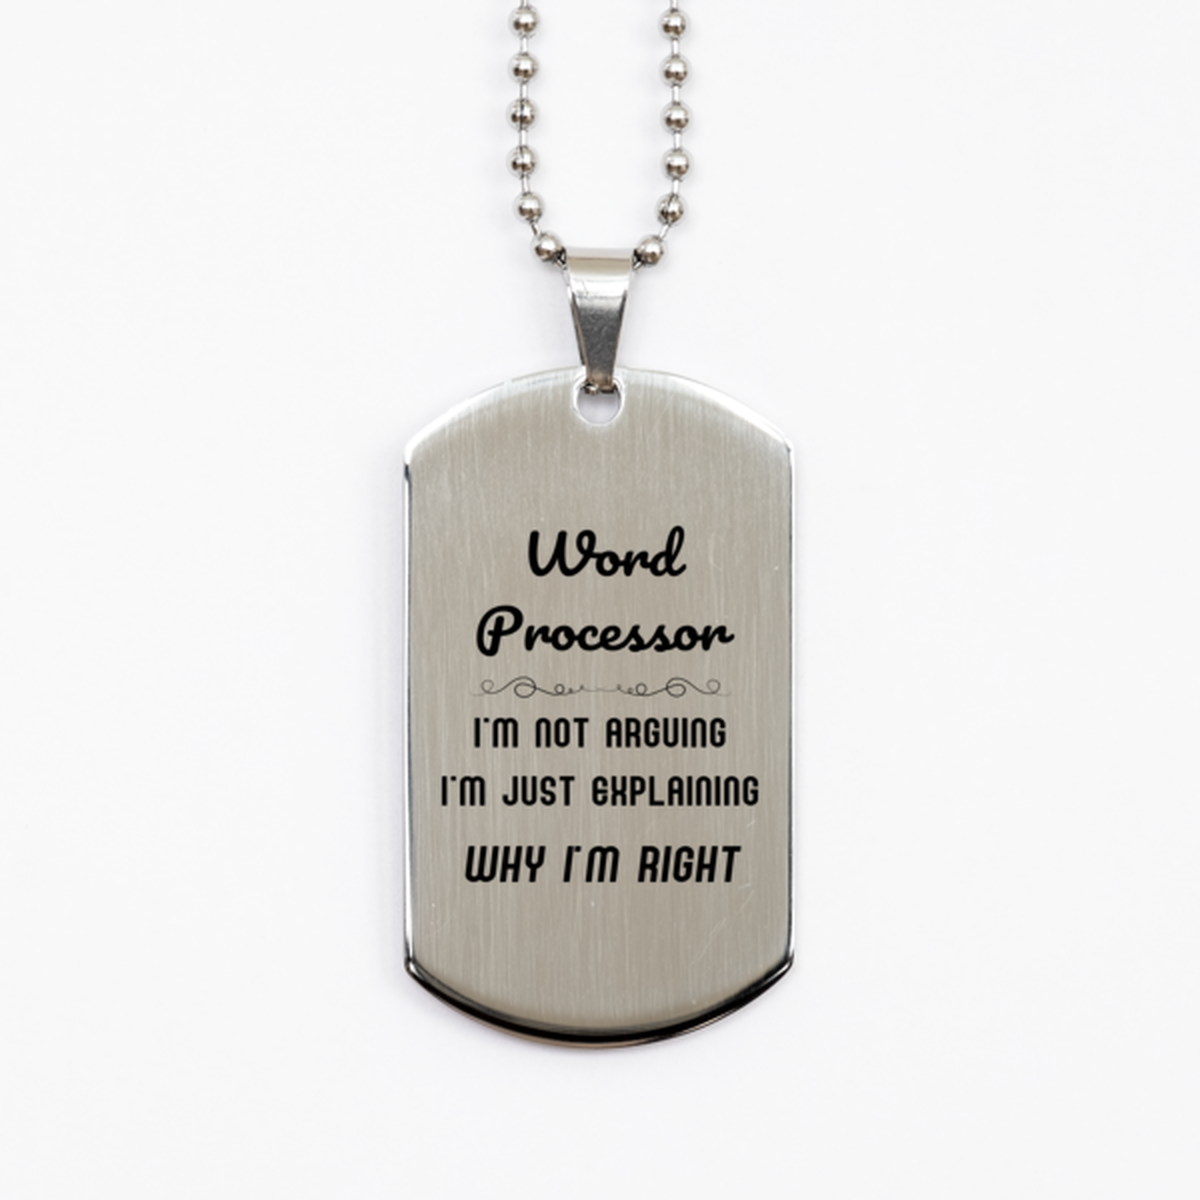 Word Processor I'm not Arguing. I'm Just Explaining Why I'm RIGHT Silver Dog Tag, Funny Saying Quote Word Processor Gifts For Word Processor Graduation Birthday Christmas Gifts for Men Women Coworker